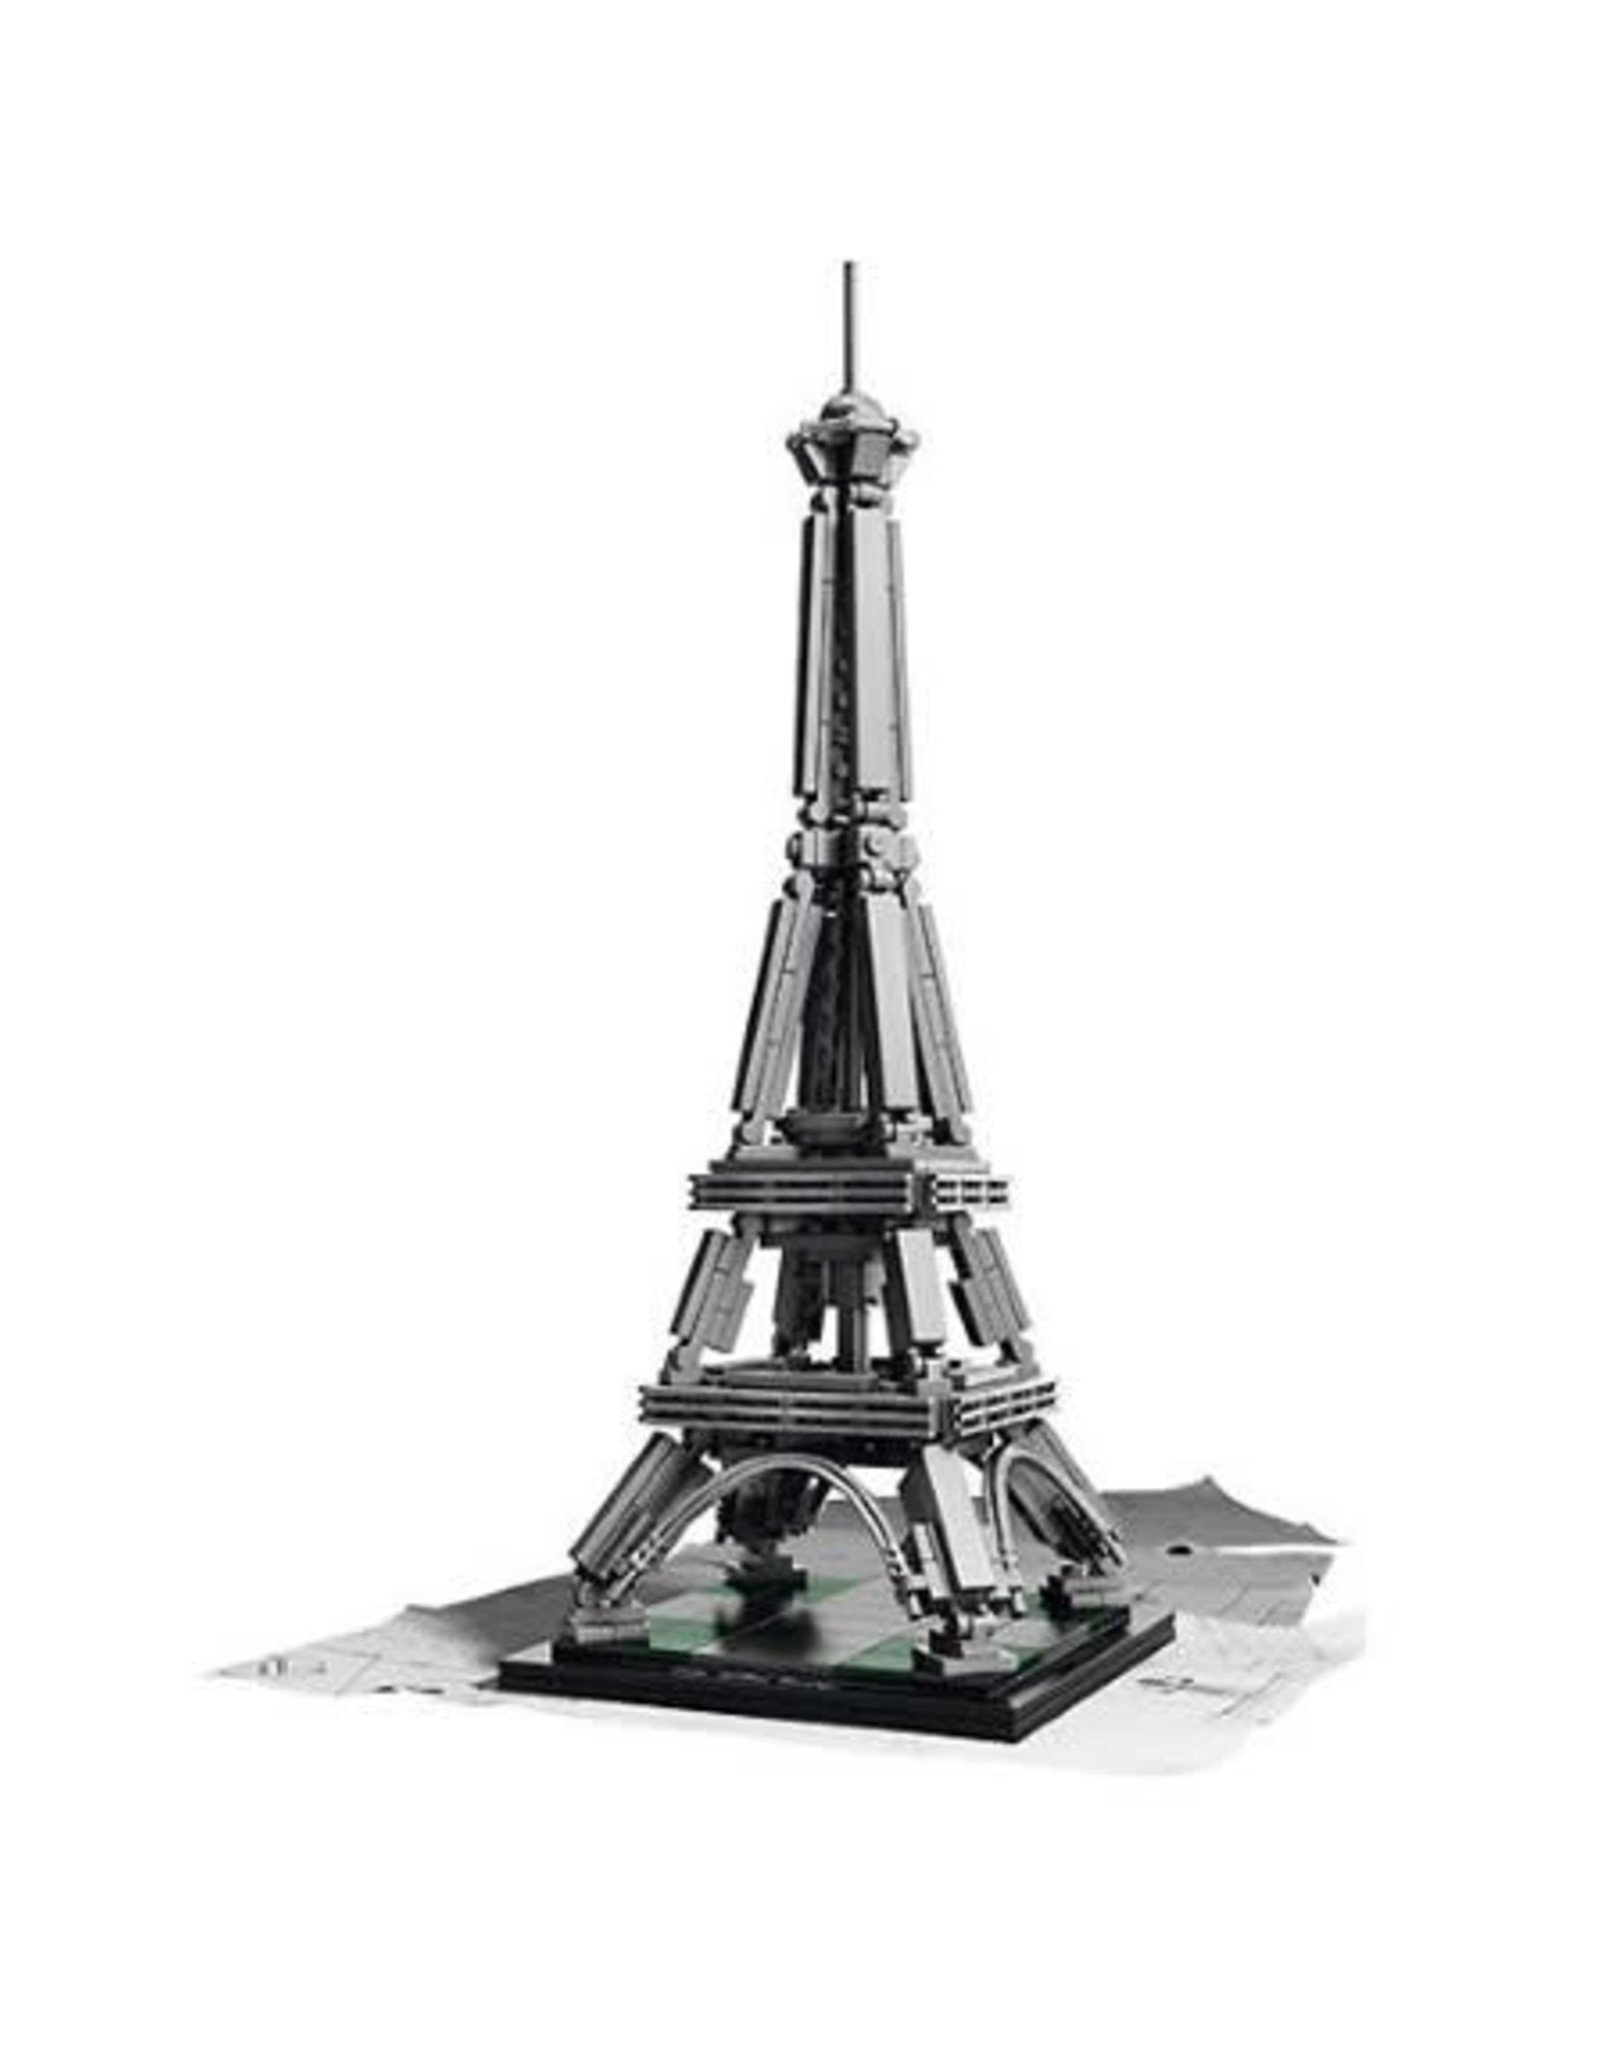 LEGO LEGO 21019 The Eiffel Tower - Architecture - SPECIALS